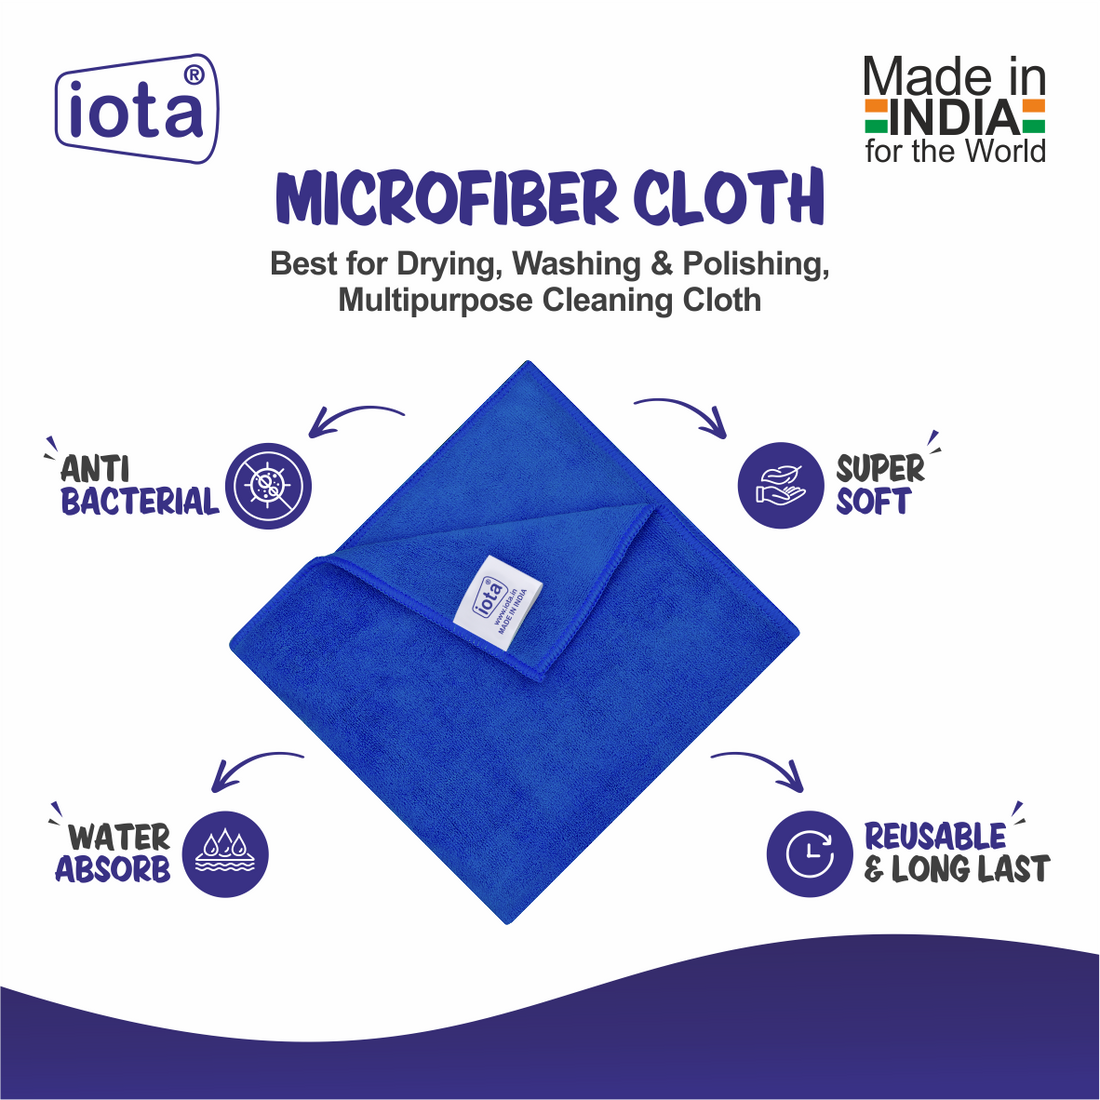 iota Microfiber Cleaning Cloth 40x40cms 450 GSM Highly Absorbent Microfiber Cloth for Home and Kitchen